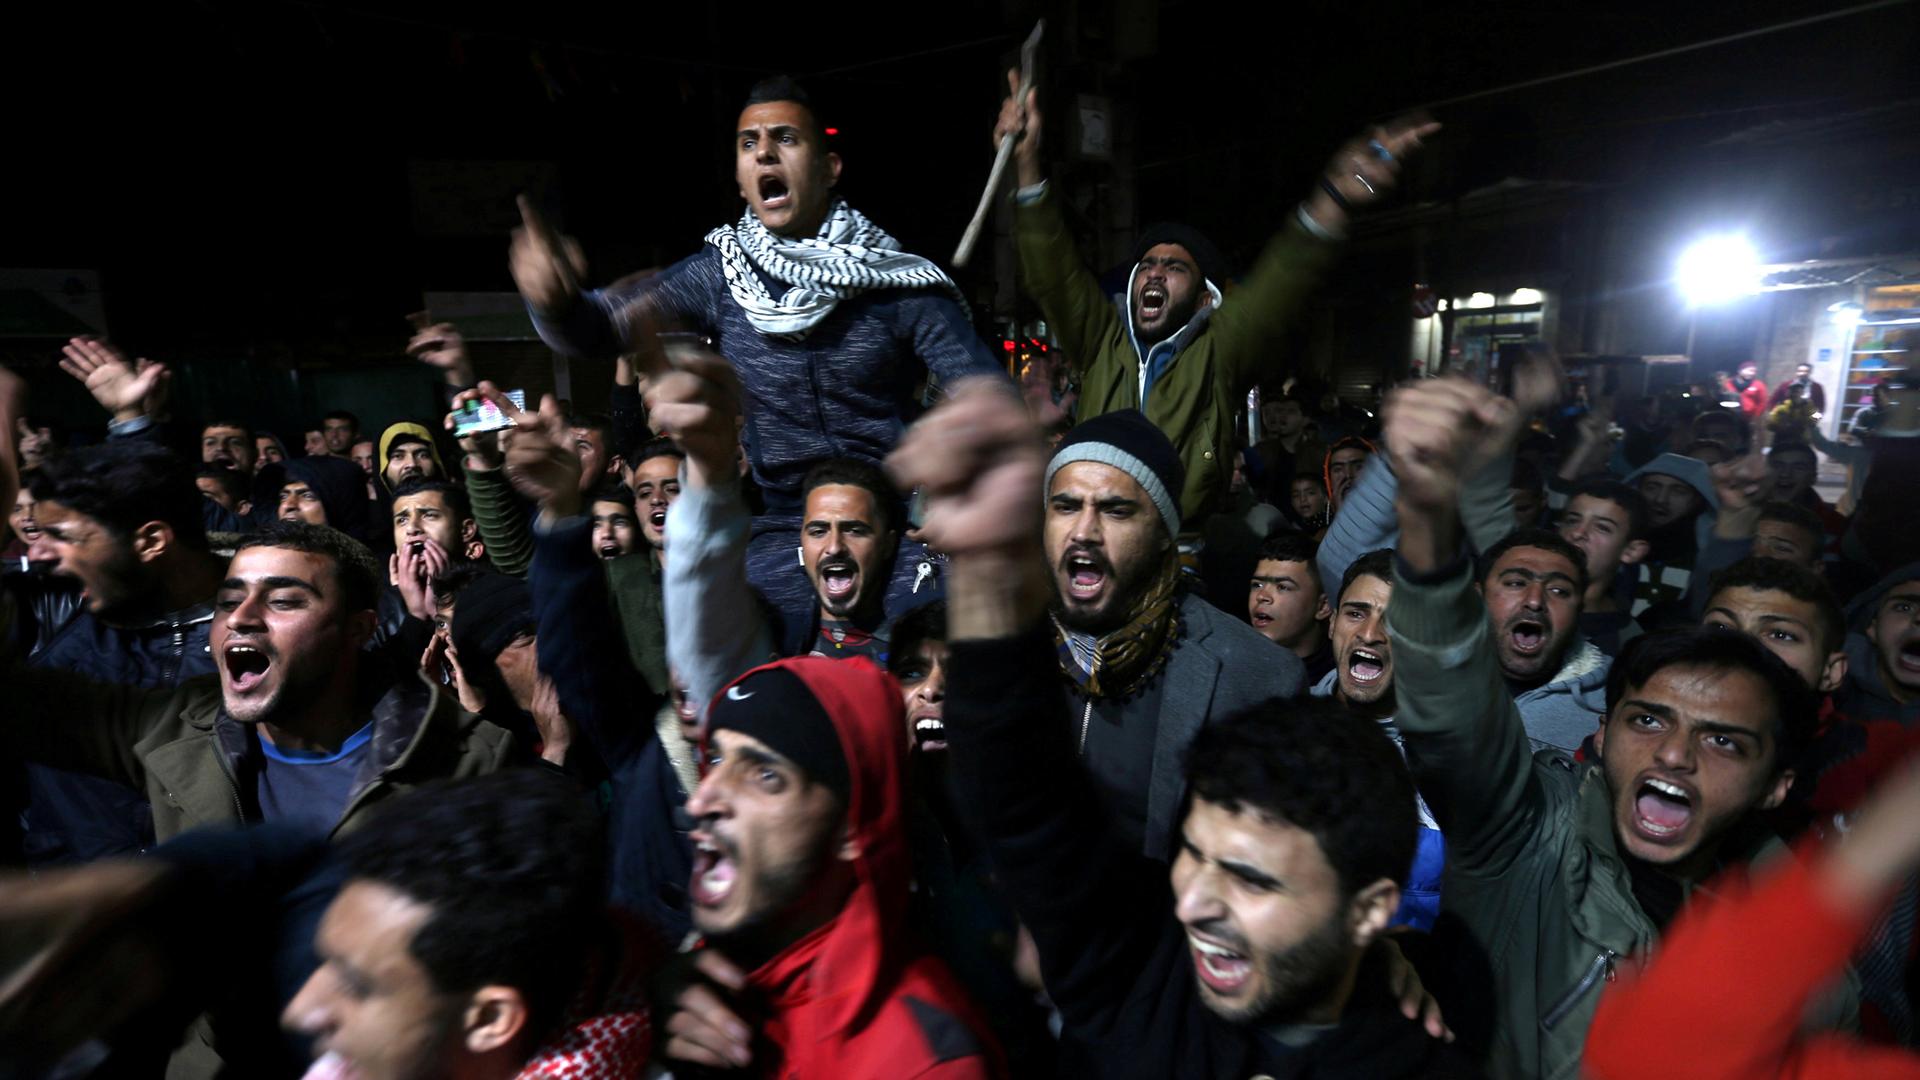 Palestinians react during a protest against Trump's decision to recognize Jerusalem as Israel's capital, in Khan Younis in the southern Gaza Strip, Dec. 7, 2017.